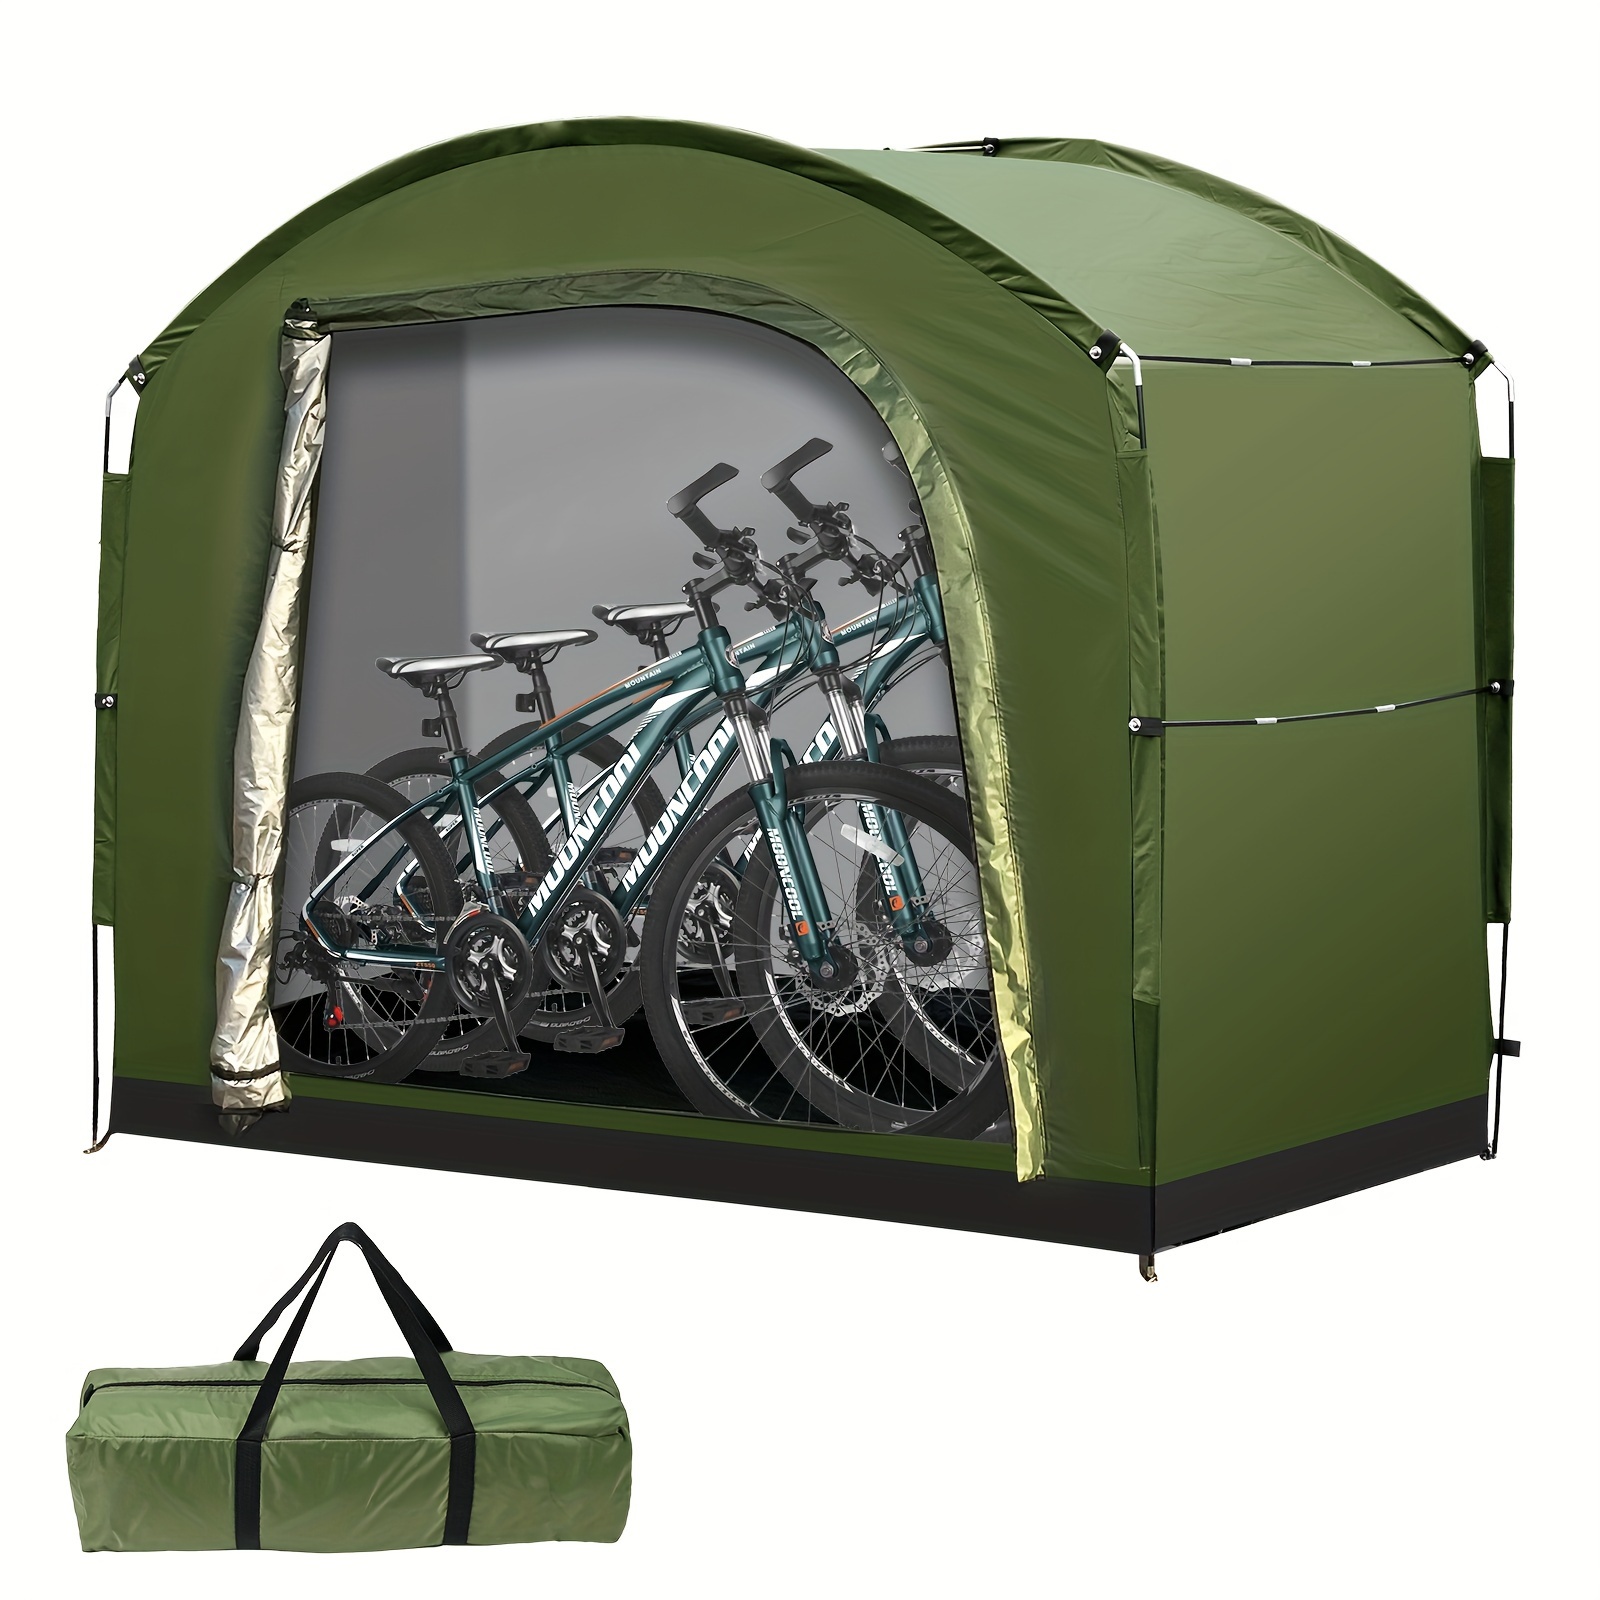 

Mophoto Bike Storage Tent, Patio Storage Shed, Outdoor Storage Cover For Over 3 Bicycles Lawn Mower Garden Tools, Waterproof Bike Storage Tent Shelter